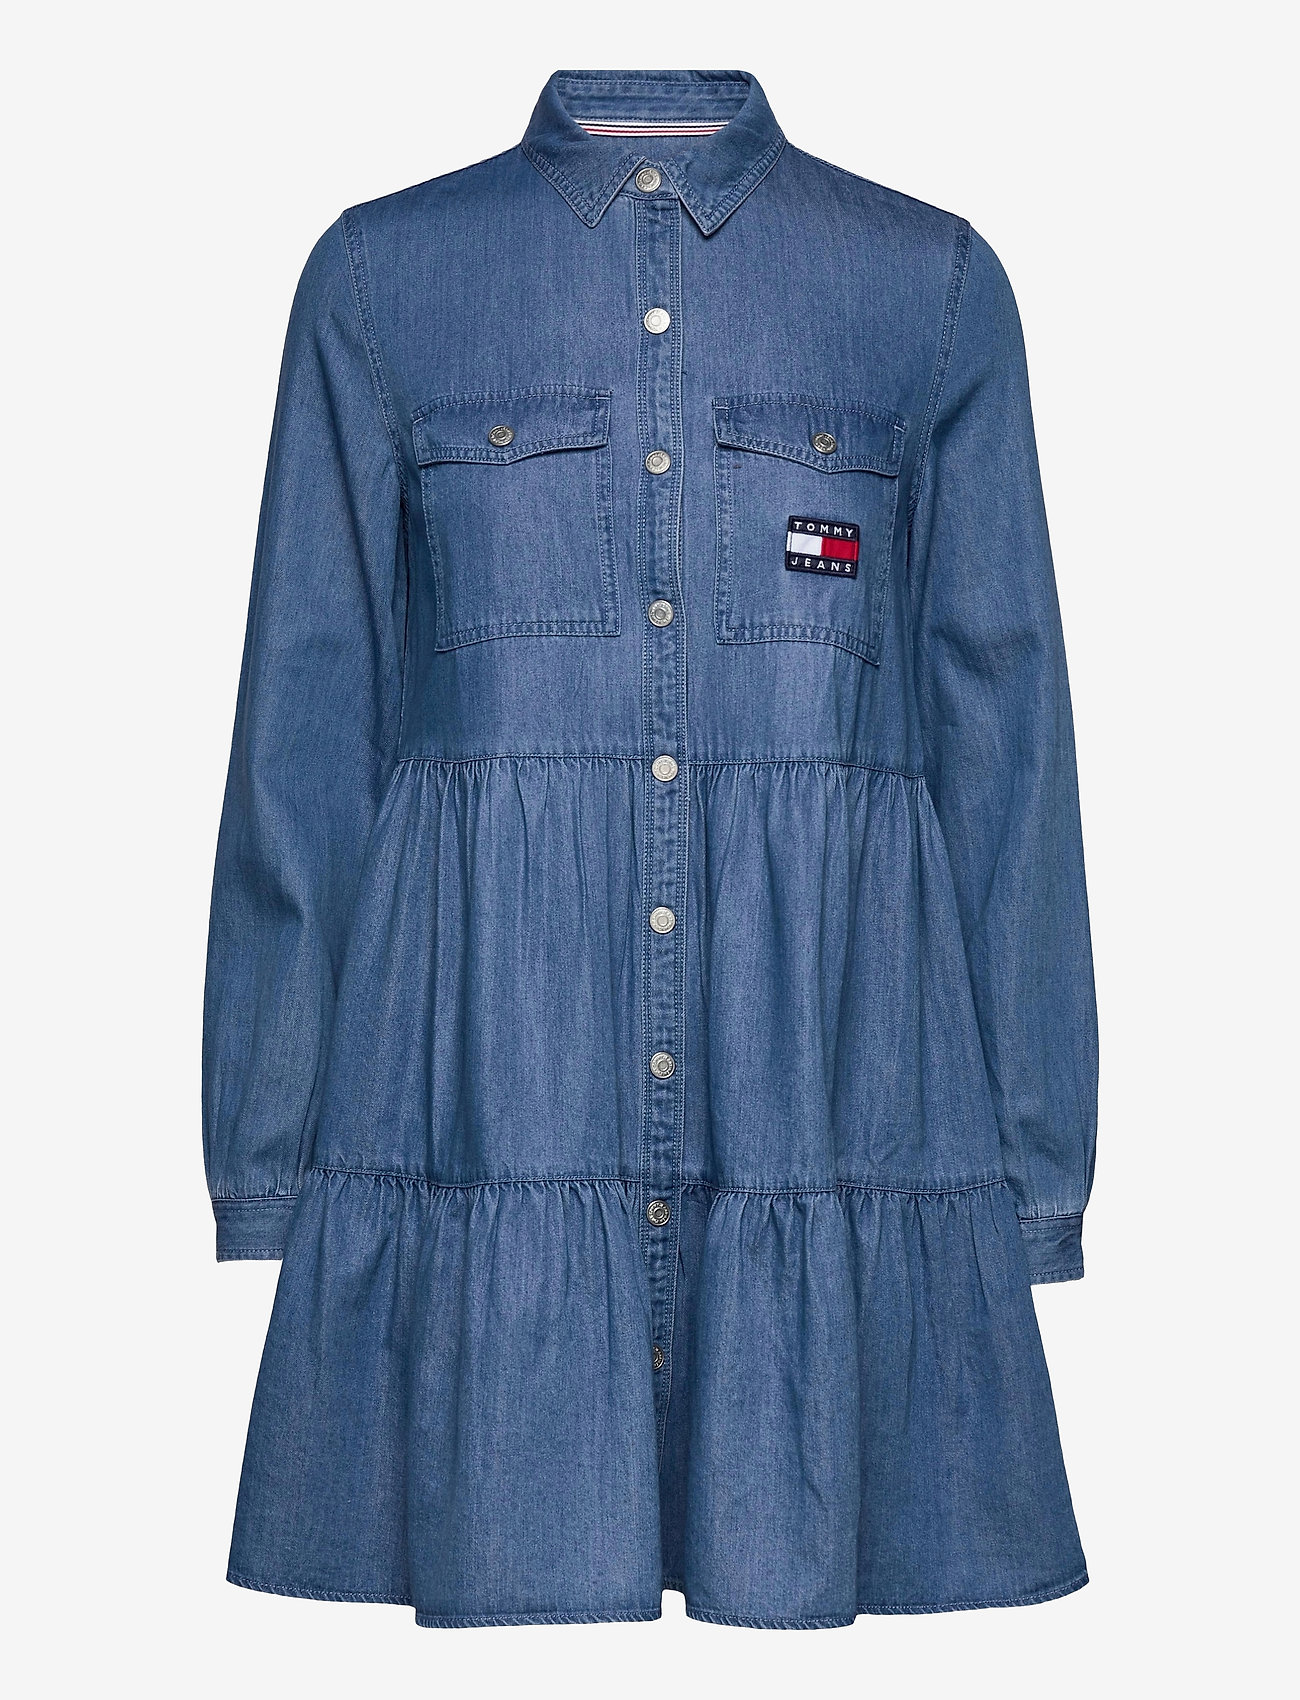 tommy jeans dresses